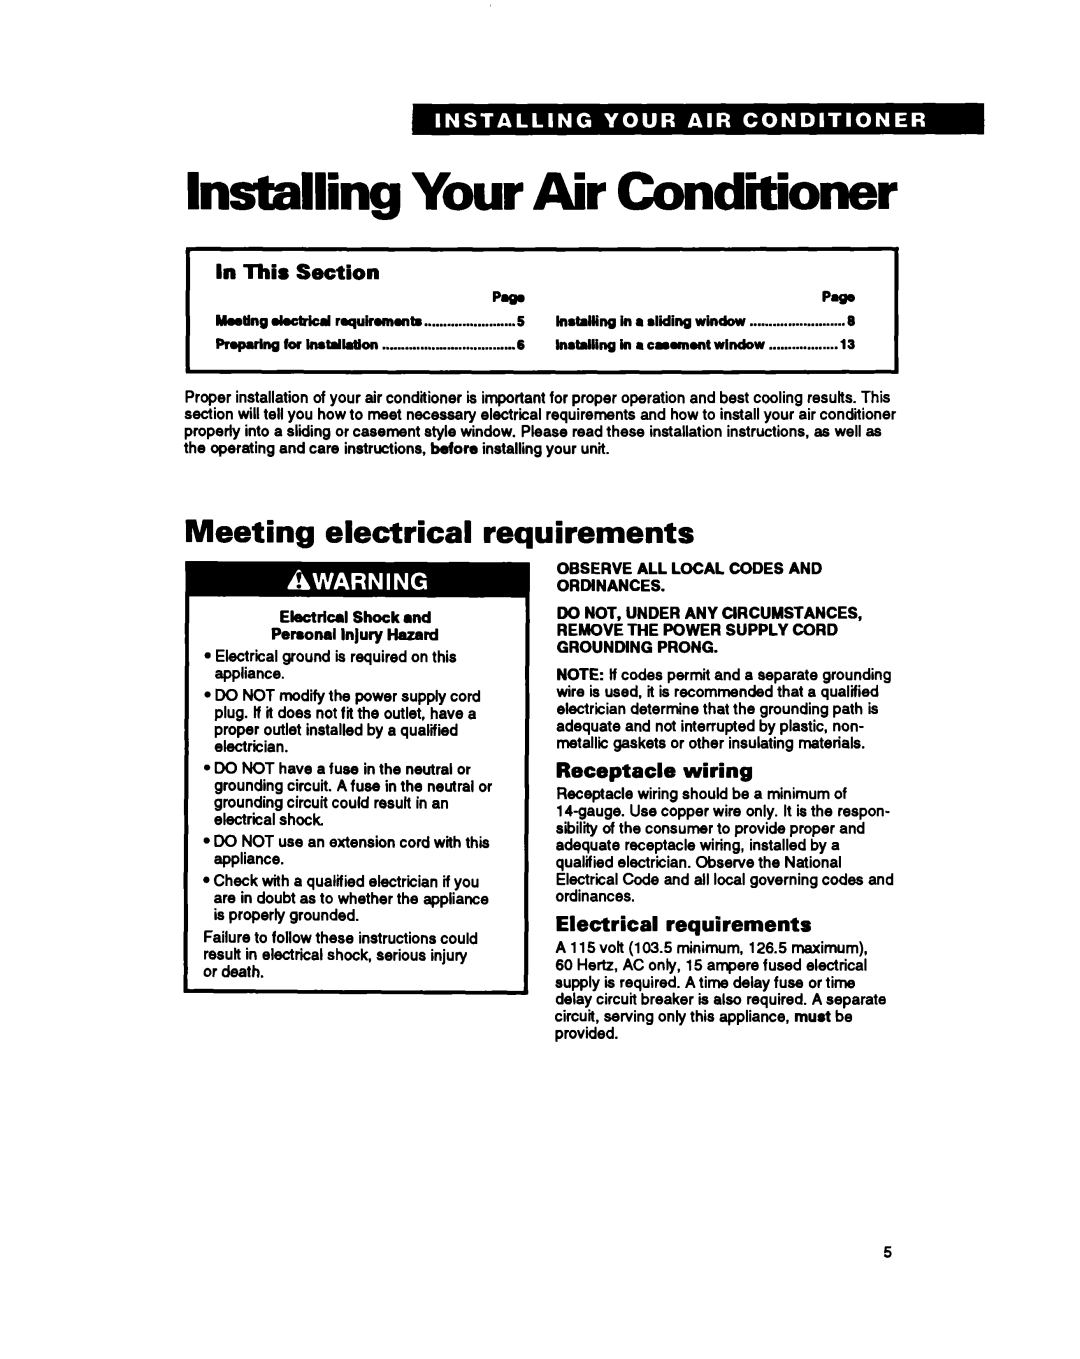 Whirlpool ACSIOZ ACS520 warranty Installing Your Air Condiiioner, Meeting electrical requirements, In This, Section 